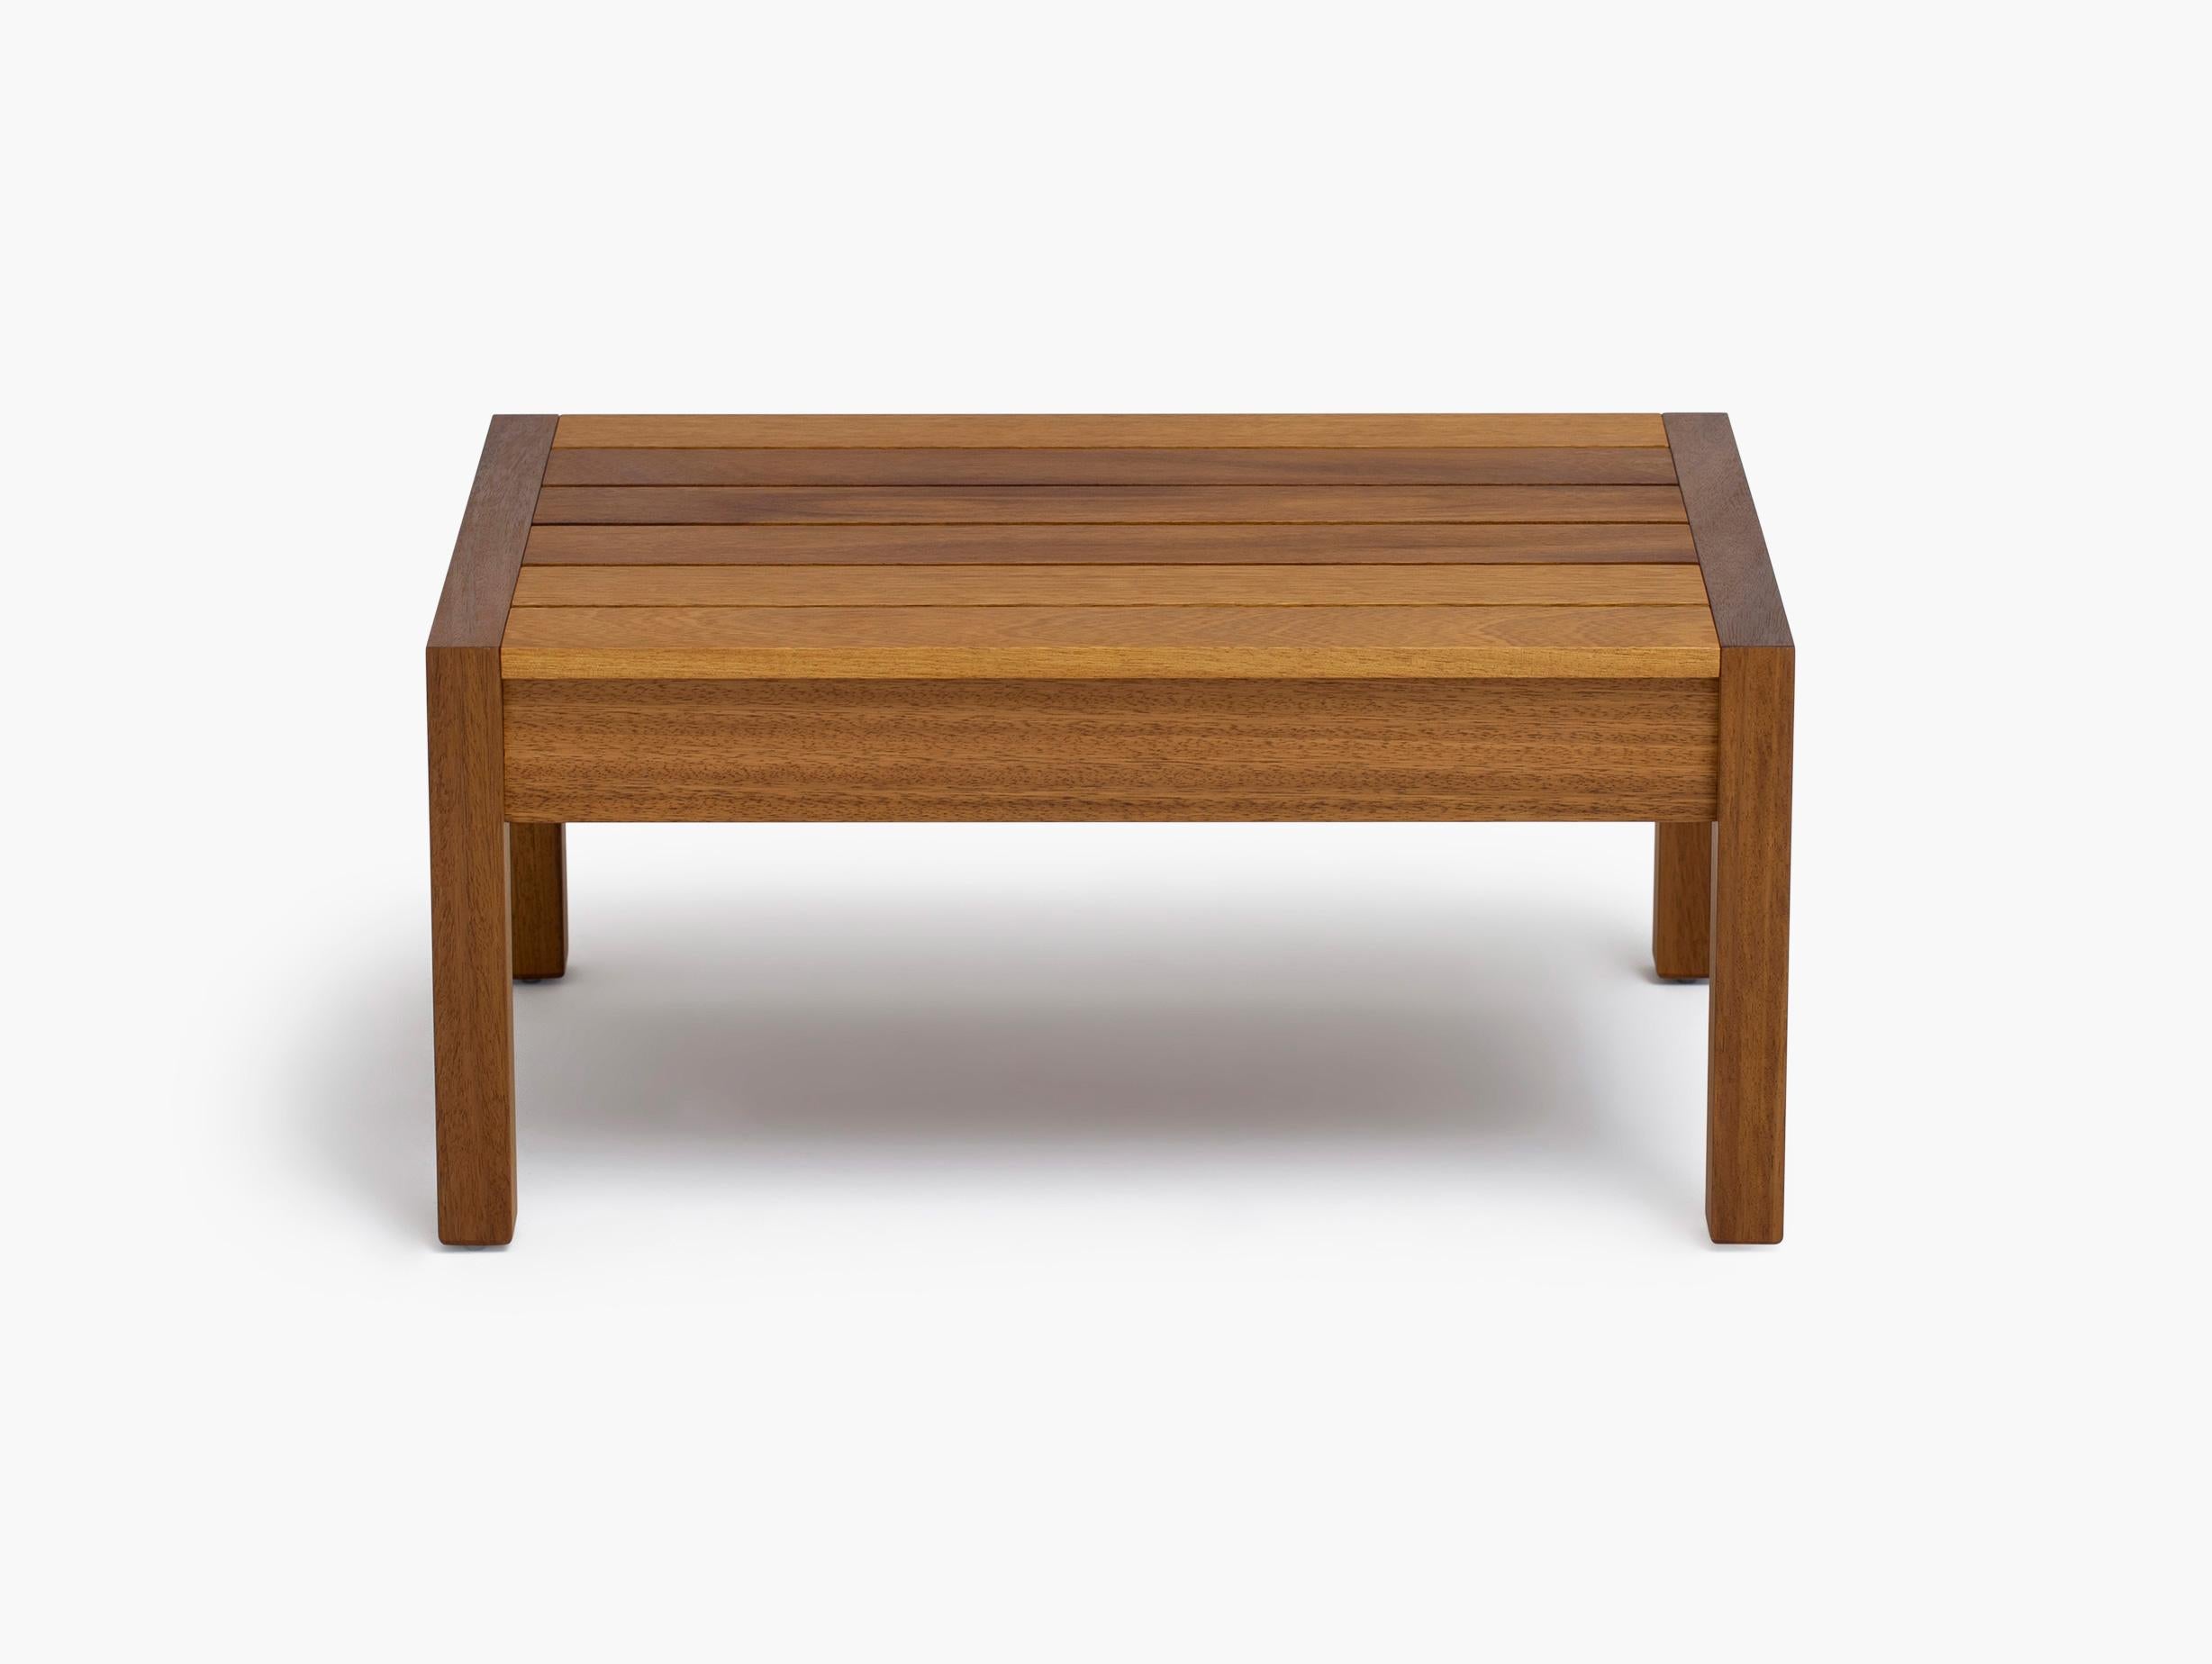 The Vinson Low Table is made from solid iroko wood, which is naturally weather resistant and incredibly durable. Its simple, classic design benefits from the use of the highest quality materials. In combination with our Vinson Sofa, Vinson Chair and